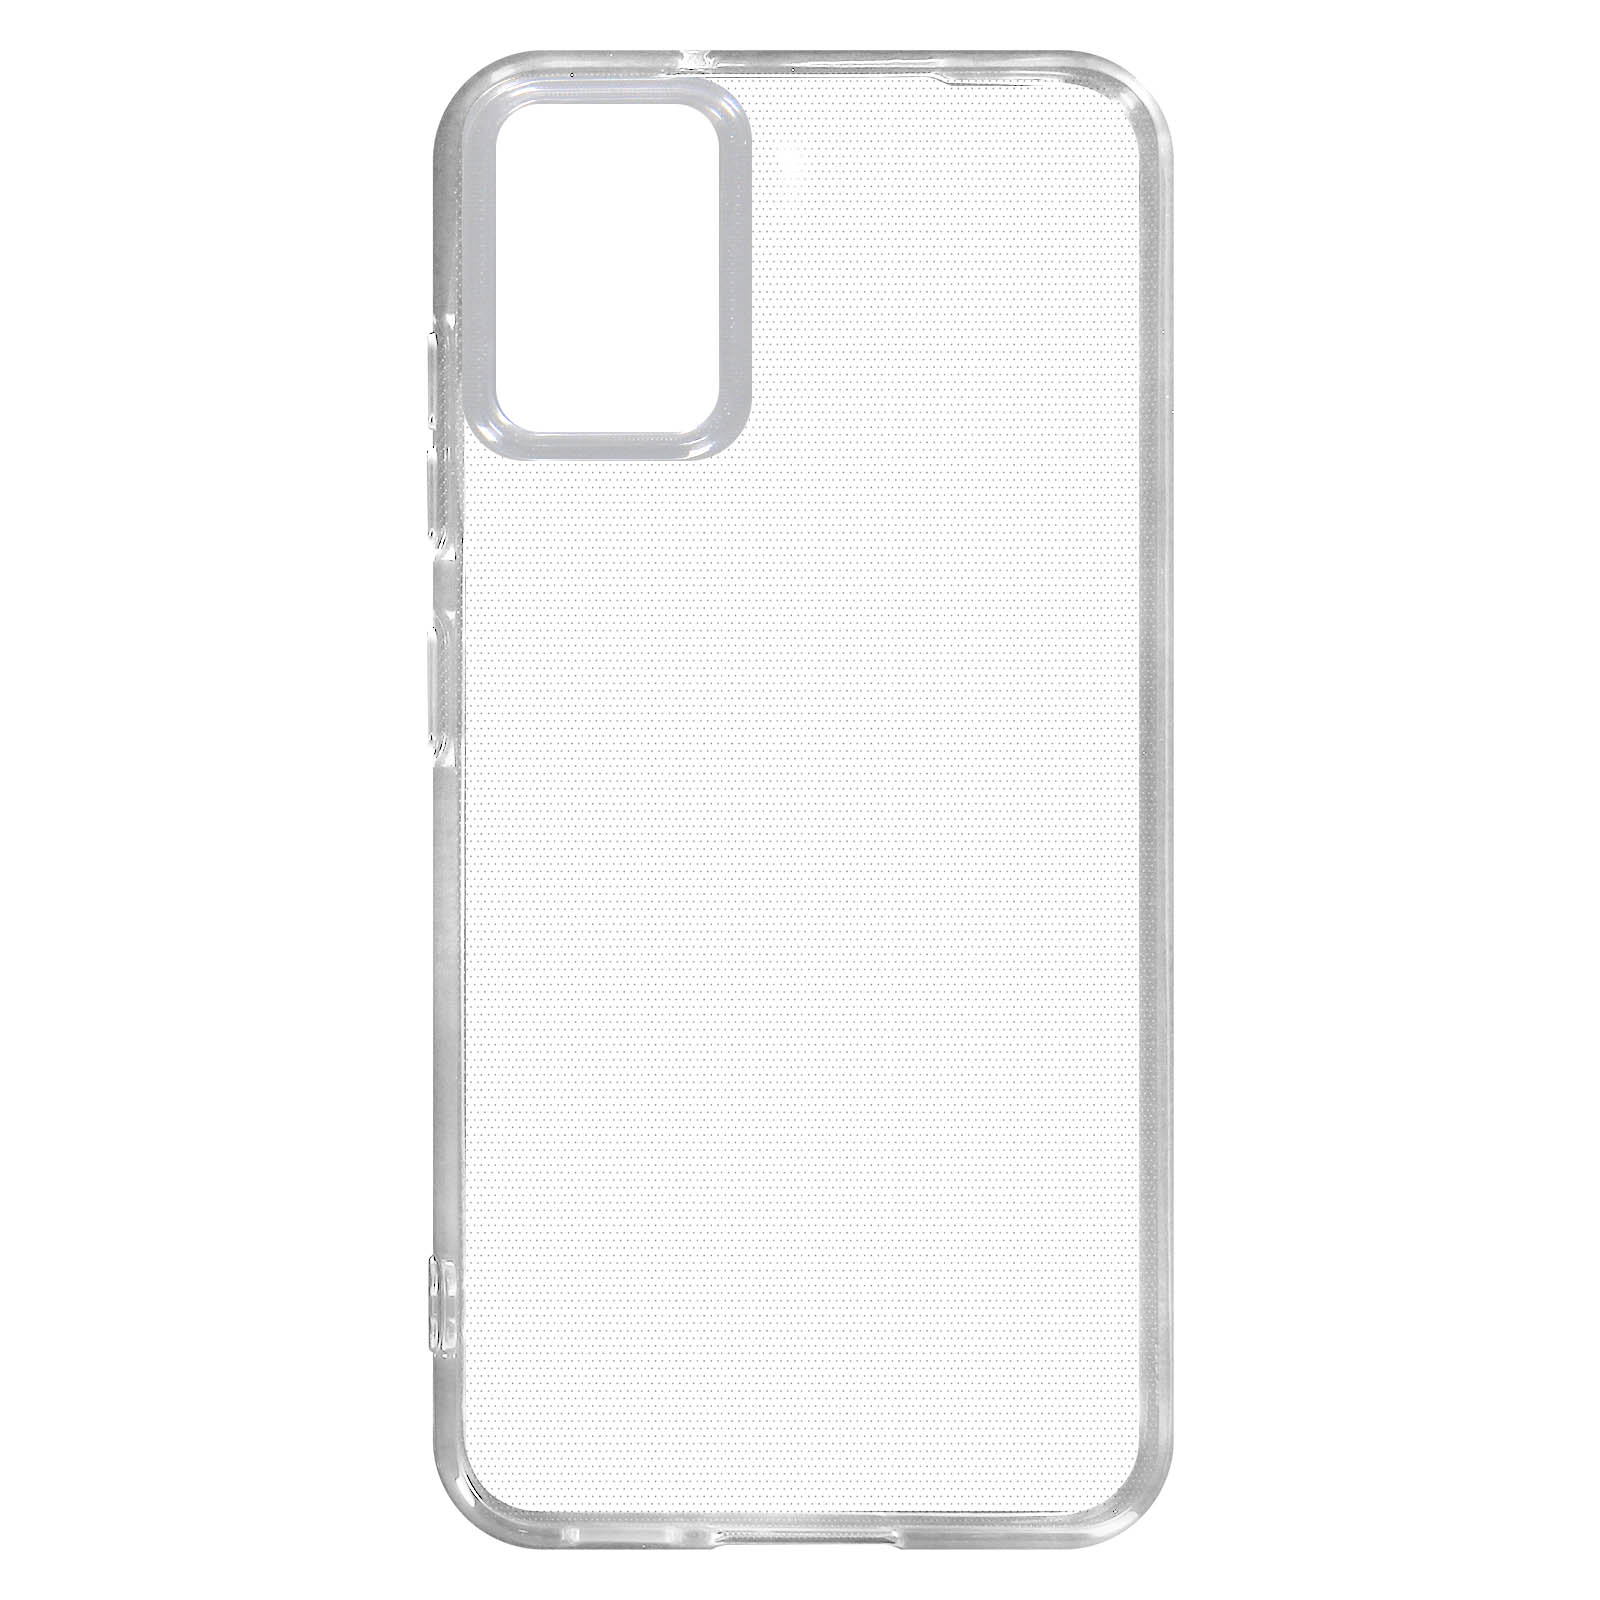 Series, G72, Transparent Cover TACTICAL Motorola, Backcover, Clear Moto